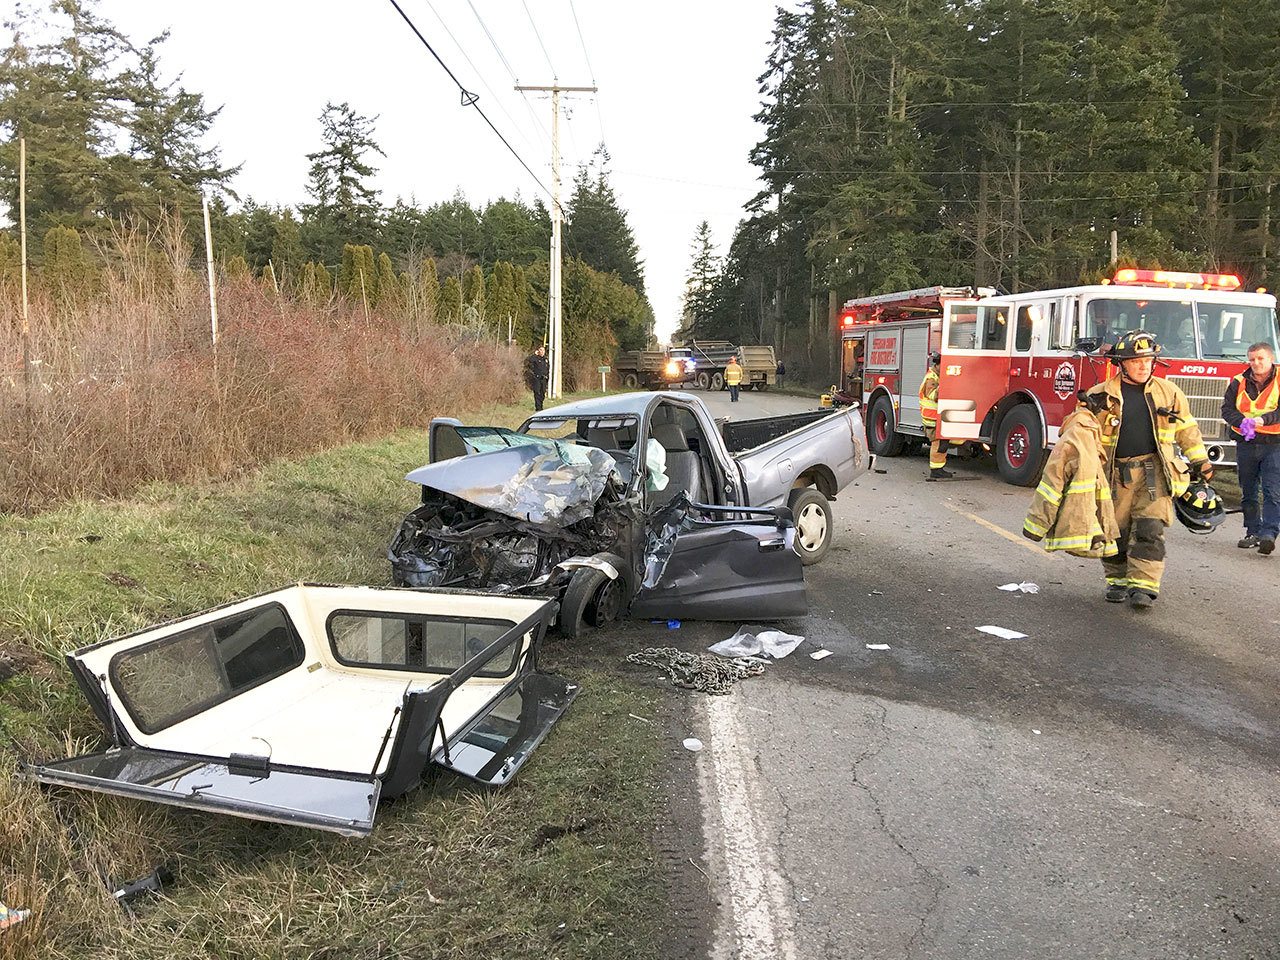 A 67-year-old Port Townsend woman was airlifted to Harborview Medical Center in Seattle following a wreck just outside Port Townsend late Tuesday afternoon. (East Jefferson Fire-Rescue)